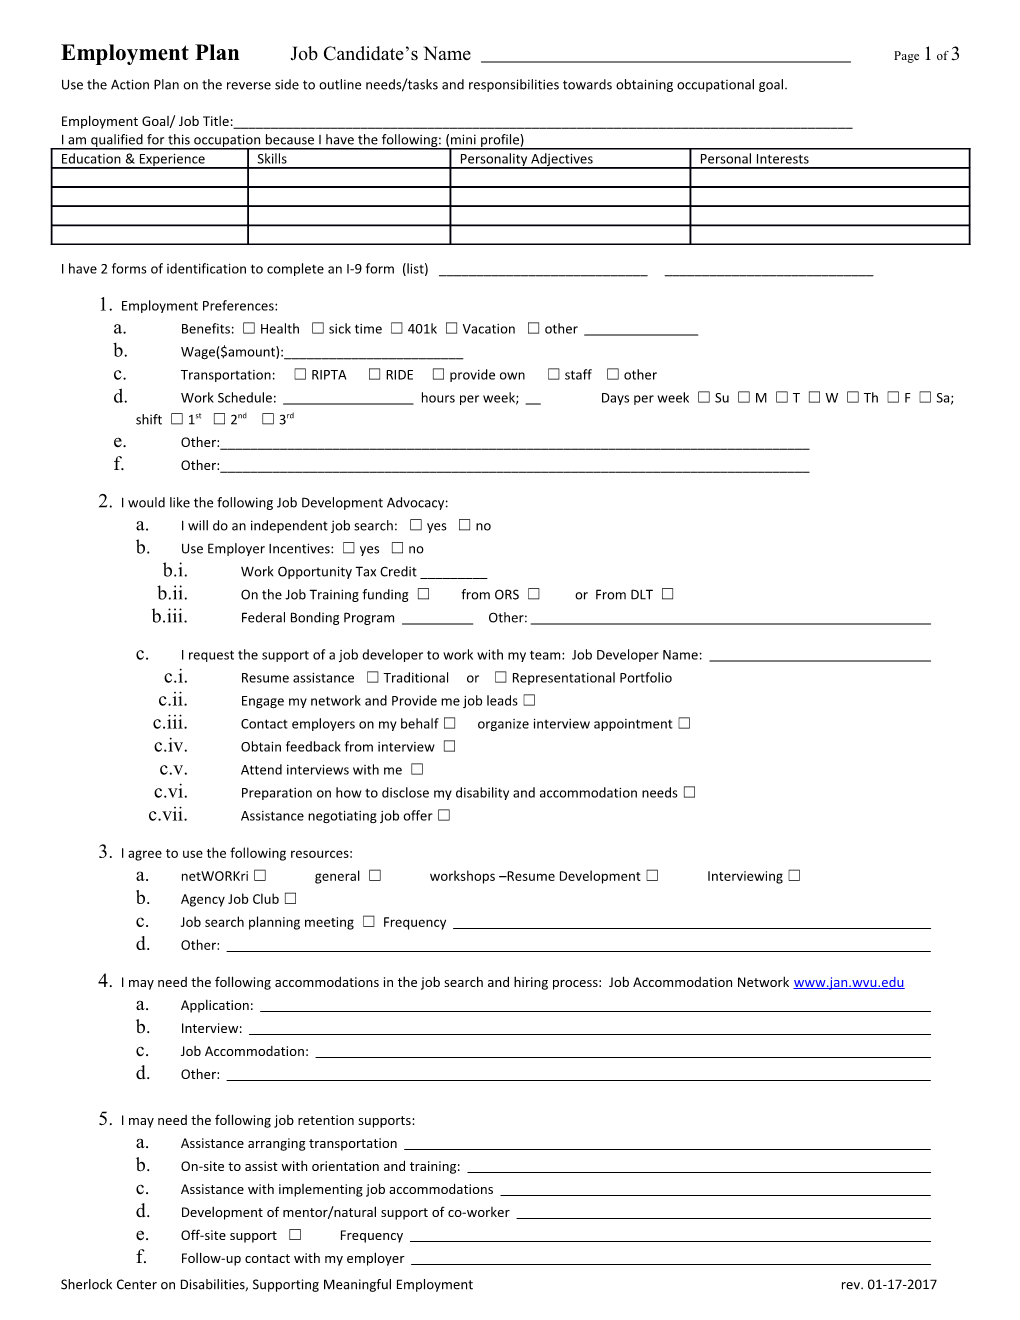 Employment Plan Job Candidate S Name Page 1 of 2